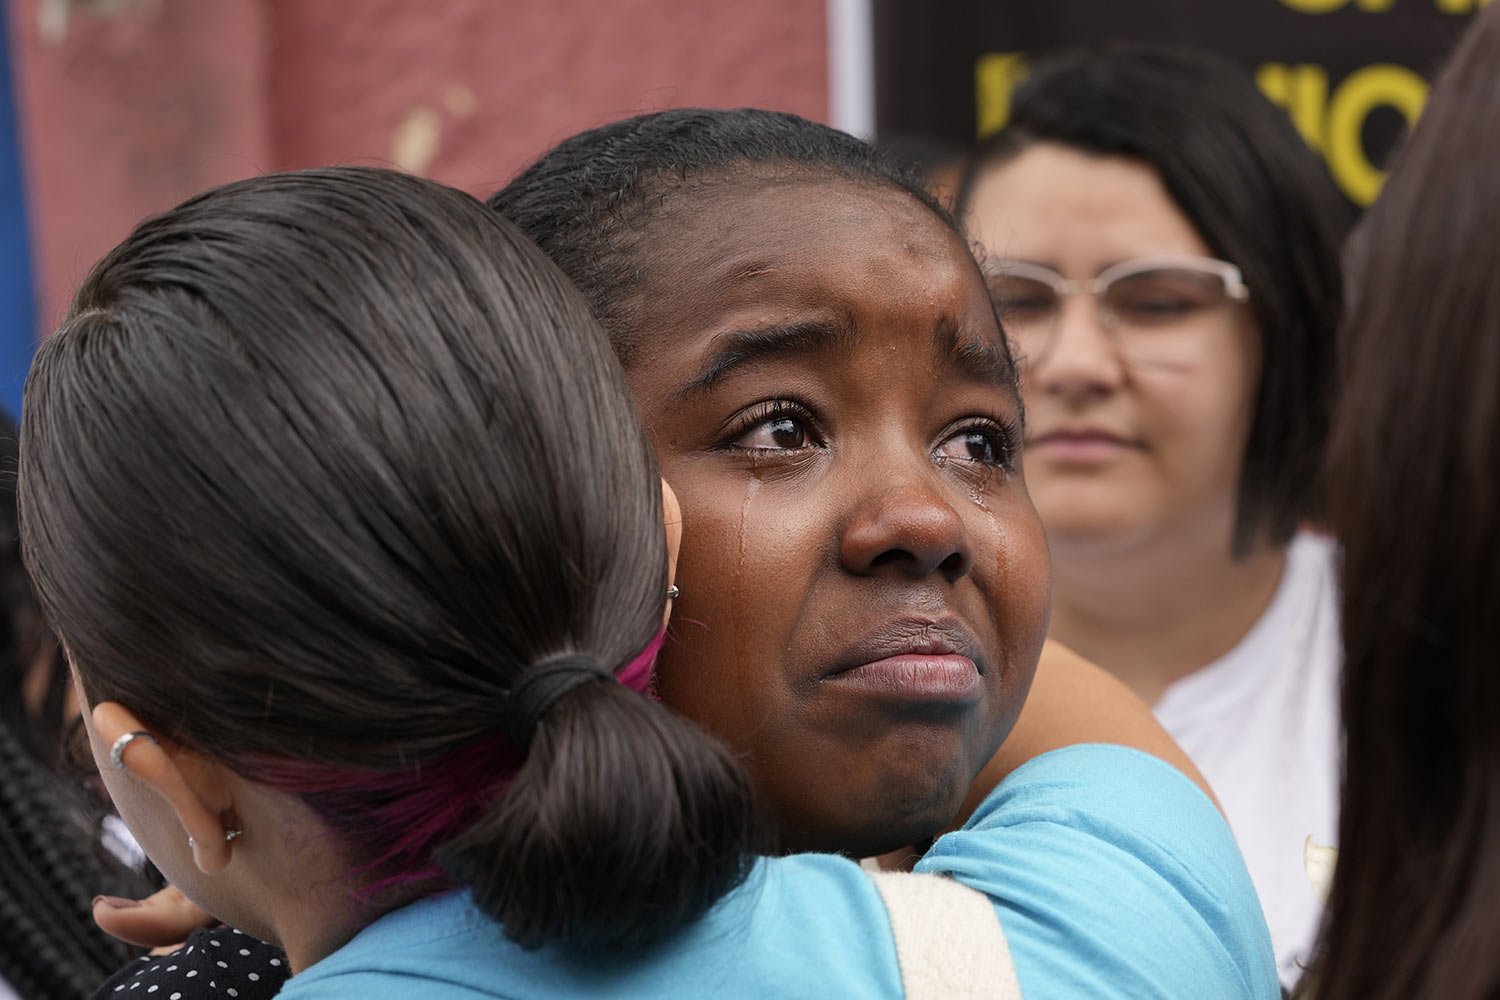  Helloisa Bastos de Carvalho, a student at the Thomazia Montoro public school, is comforted by a friend during a vigil the day after a fatal stabbing at her school in Sao Paulo, Brazil, March 28, 2023. A 13-year-old student fatally stabbed a 71-year-